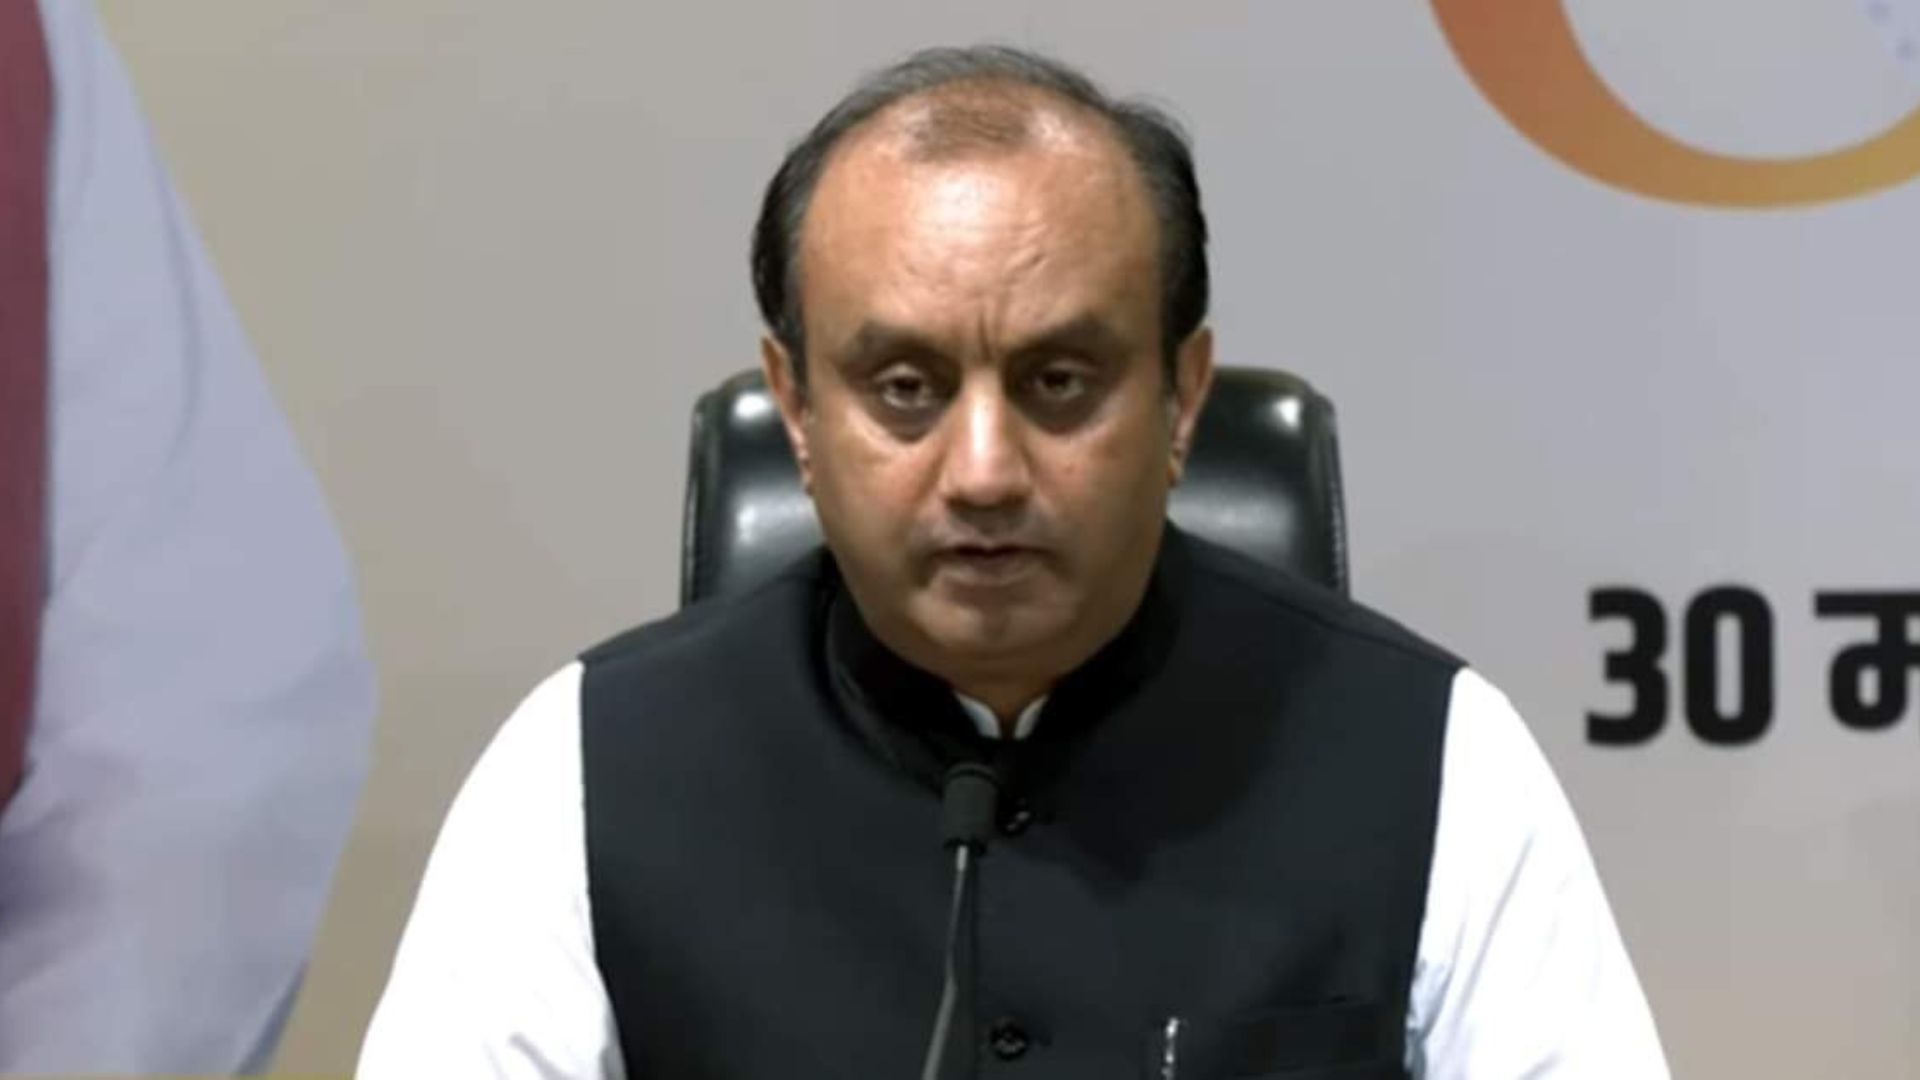 Lalu Prasad Yadav had at least resigned when he was about to go to jail: Sudhanshu Trivedi on Kejriwal’s arrest